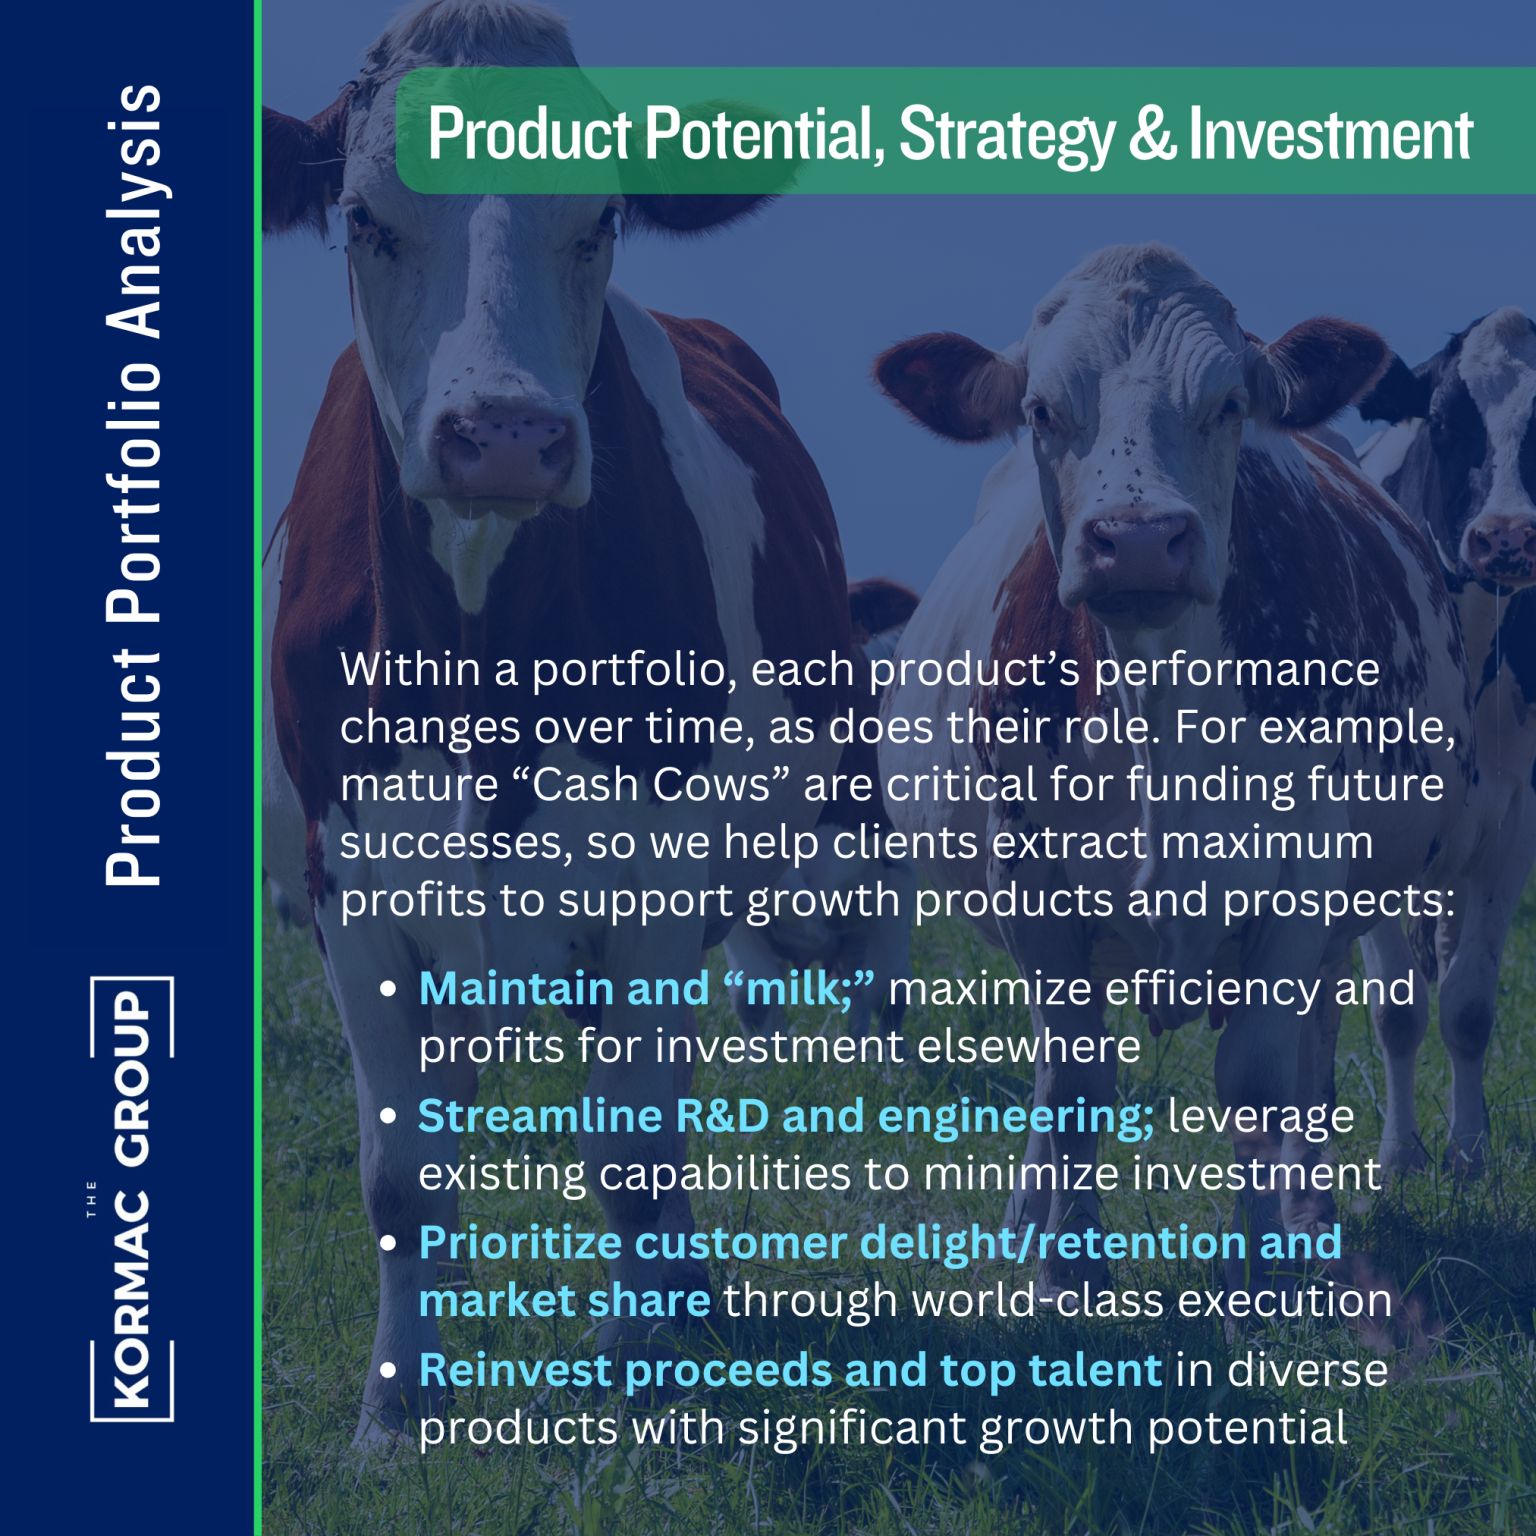 The Kormac Group: Product Portfolio Analysis Product Potential, Strategy & Investment Within a portfolio, each product's performance changes over time, as does their role. For example, mature "Cash Cows" are critical for funding future successes, so we help clients extract maximum profits to support growth products and prospects: - Maintain and "milk;" maximize efficiency and profits for investment elsewhere - Streamline R&D and engineering; leverage existing capabilities to minimize investment - Prioritize customer delight/retention and market share through world-class execution - Reinvest proceeds and top talent in diverse products with significant growth potential